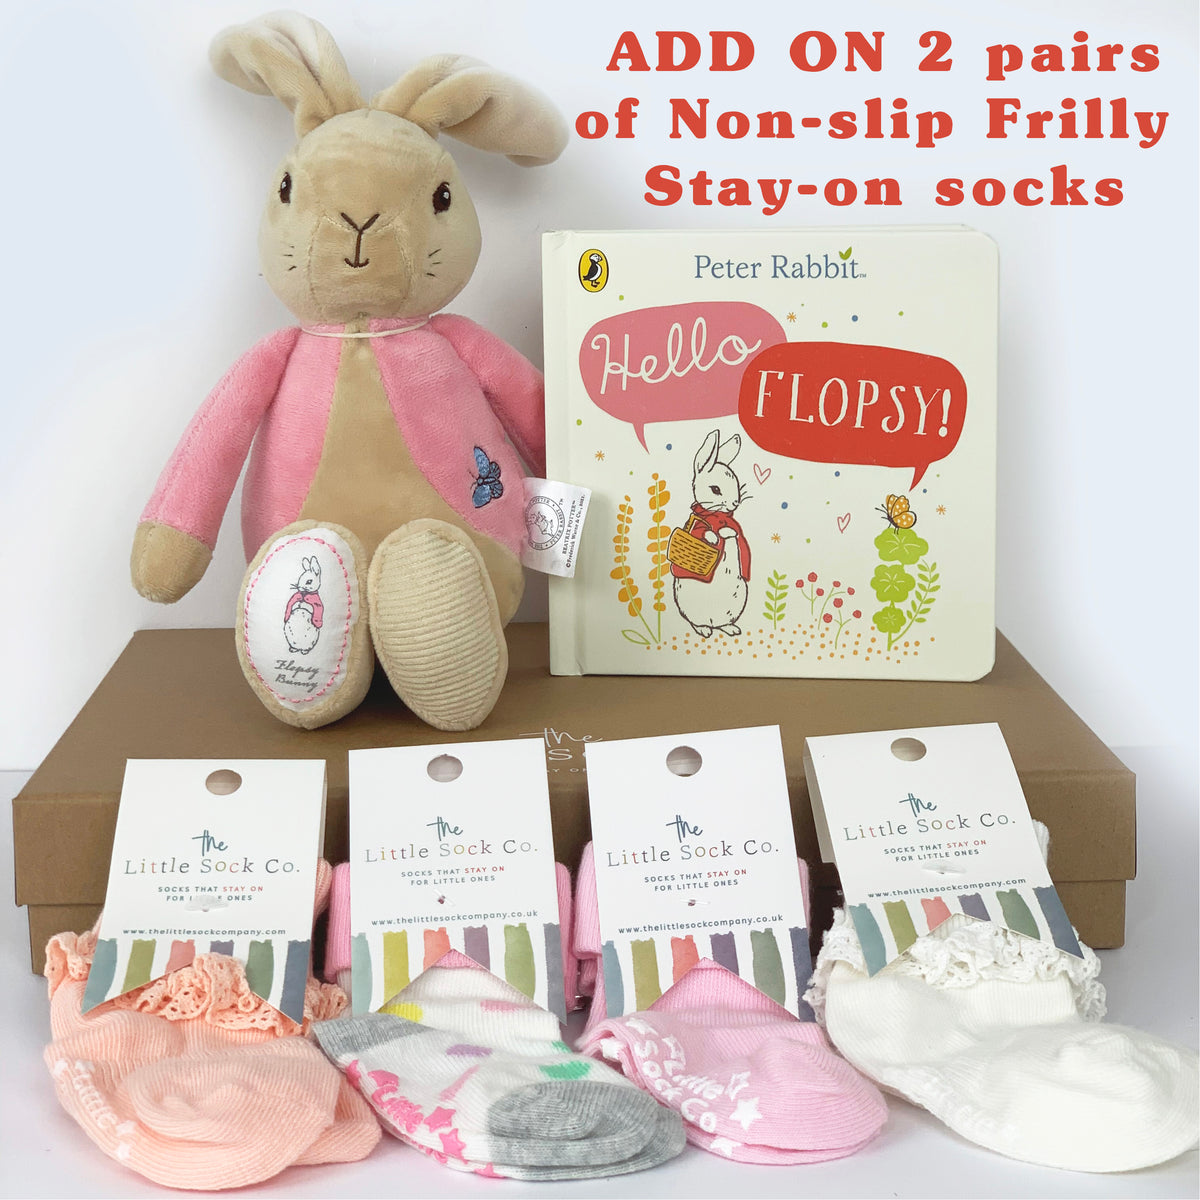 My First Flopsy Bunny Large Gift Set - Soft Cuddly Toy and Book for Baby and Toddler